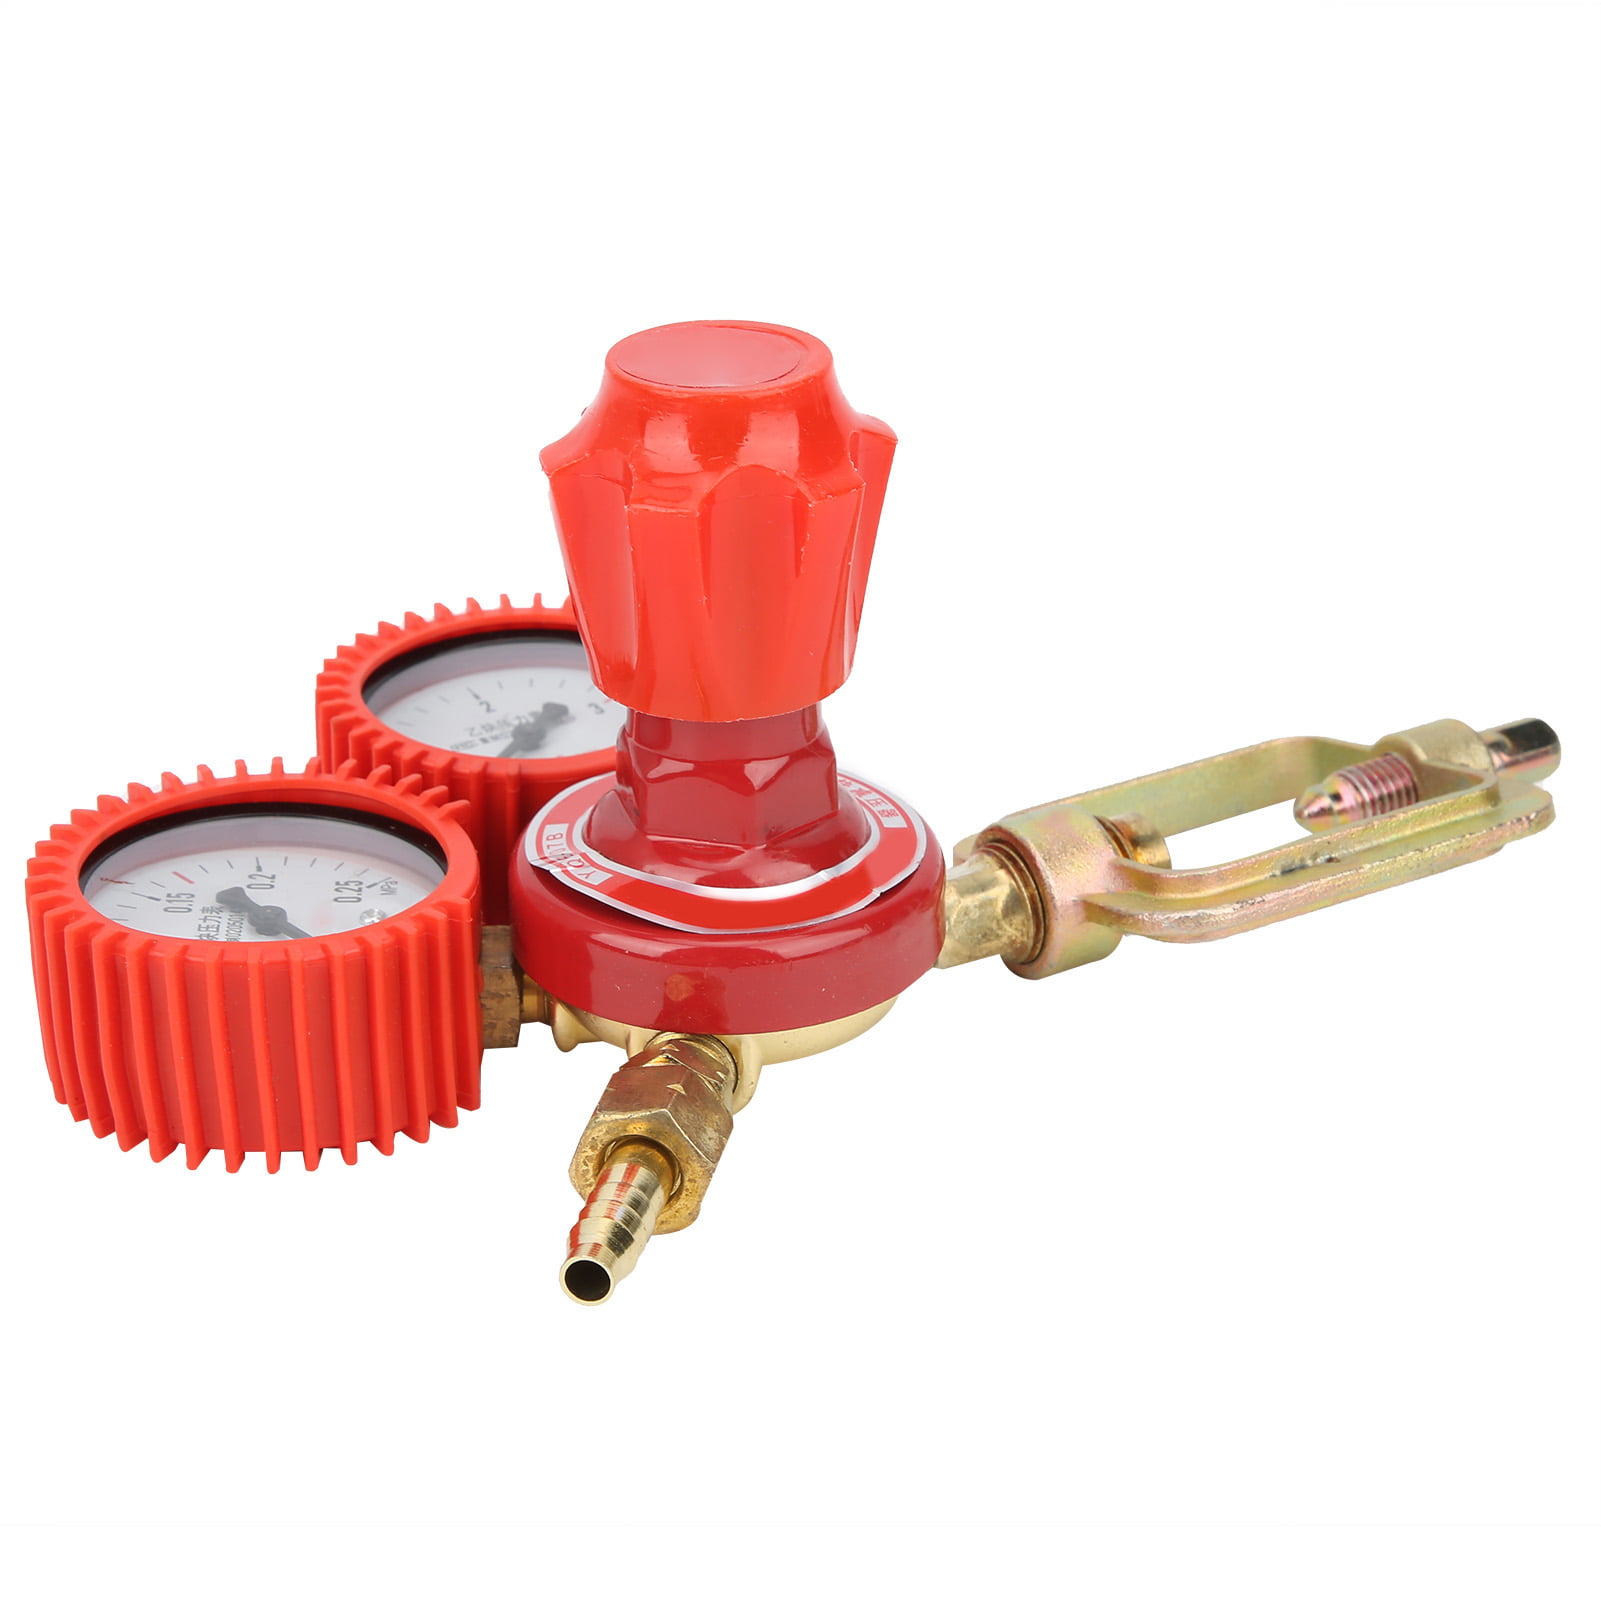 YQE-03A Pressure Reducer Good Sealing for 0.01-0.15Mpa 0.25Mpa Output 12m/h 4Mpa Input Alloy Steel Practical Red Acetylene Pressure Reducer